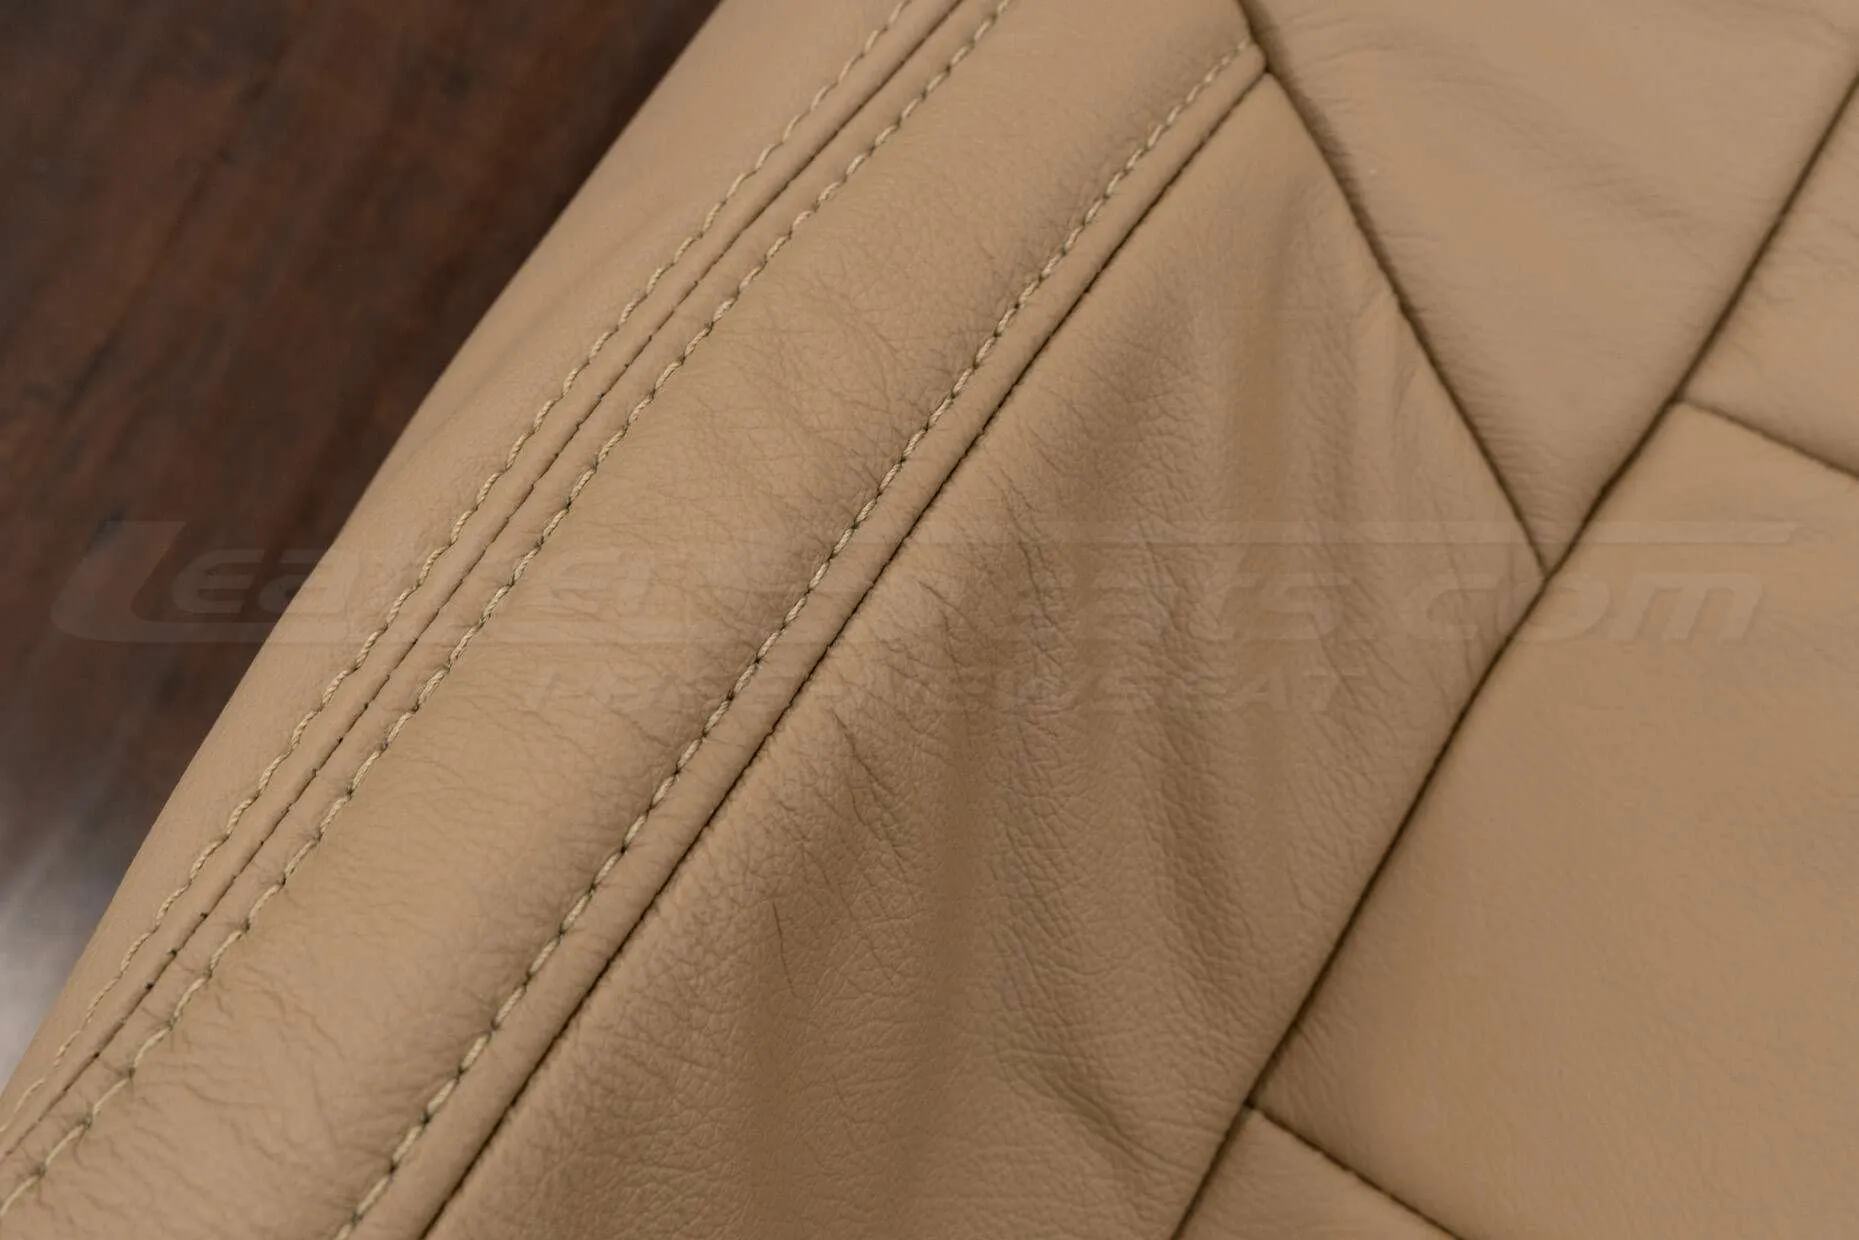 Matching double-stitching in Bisque